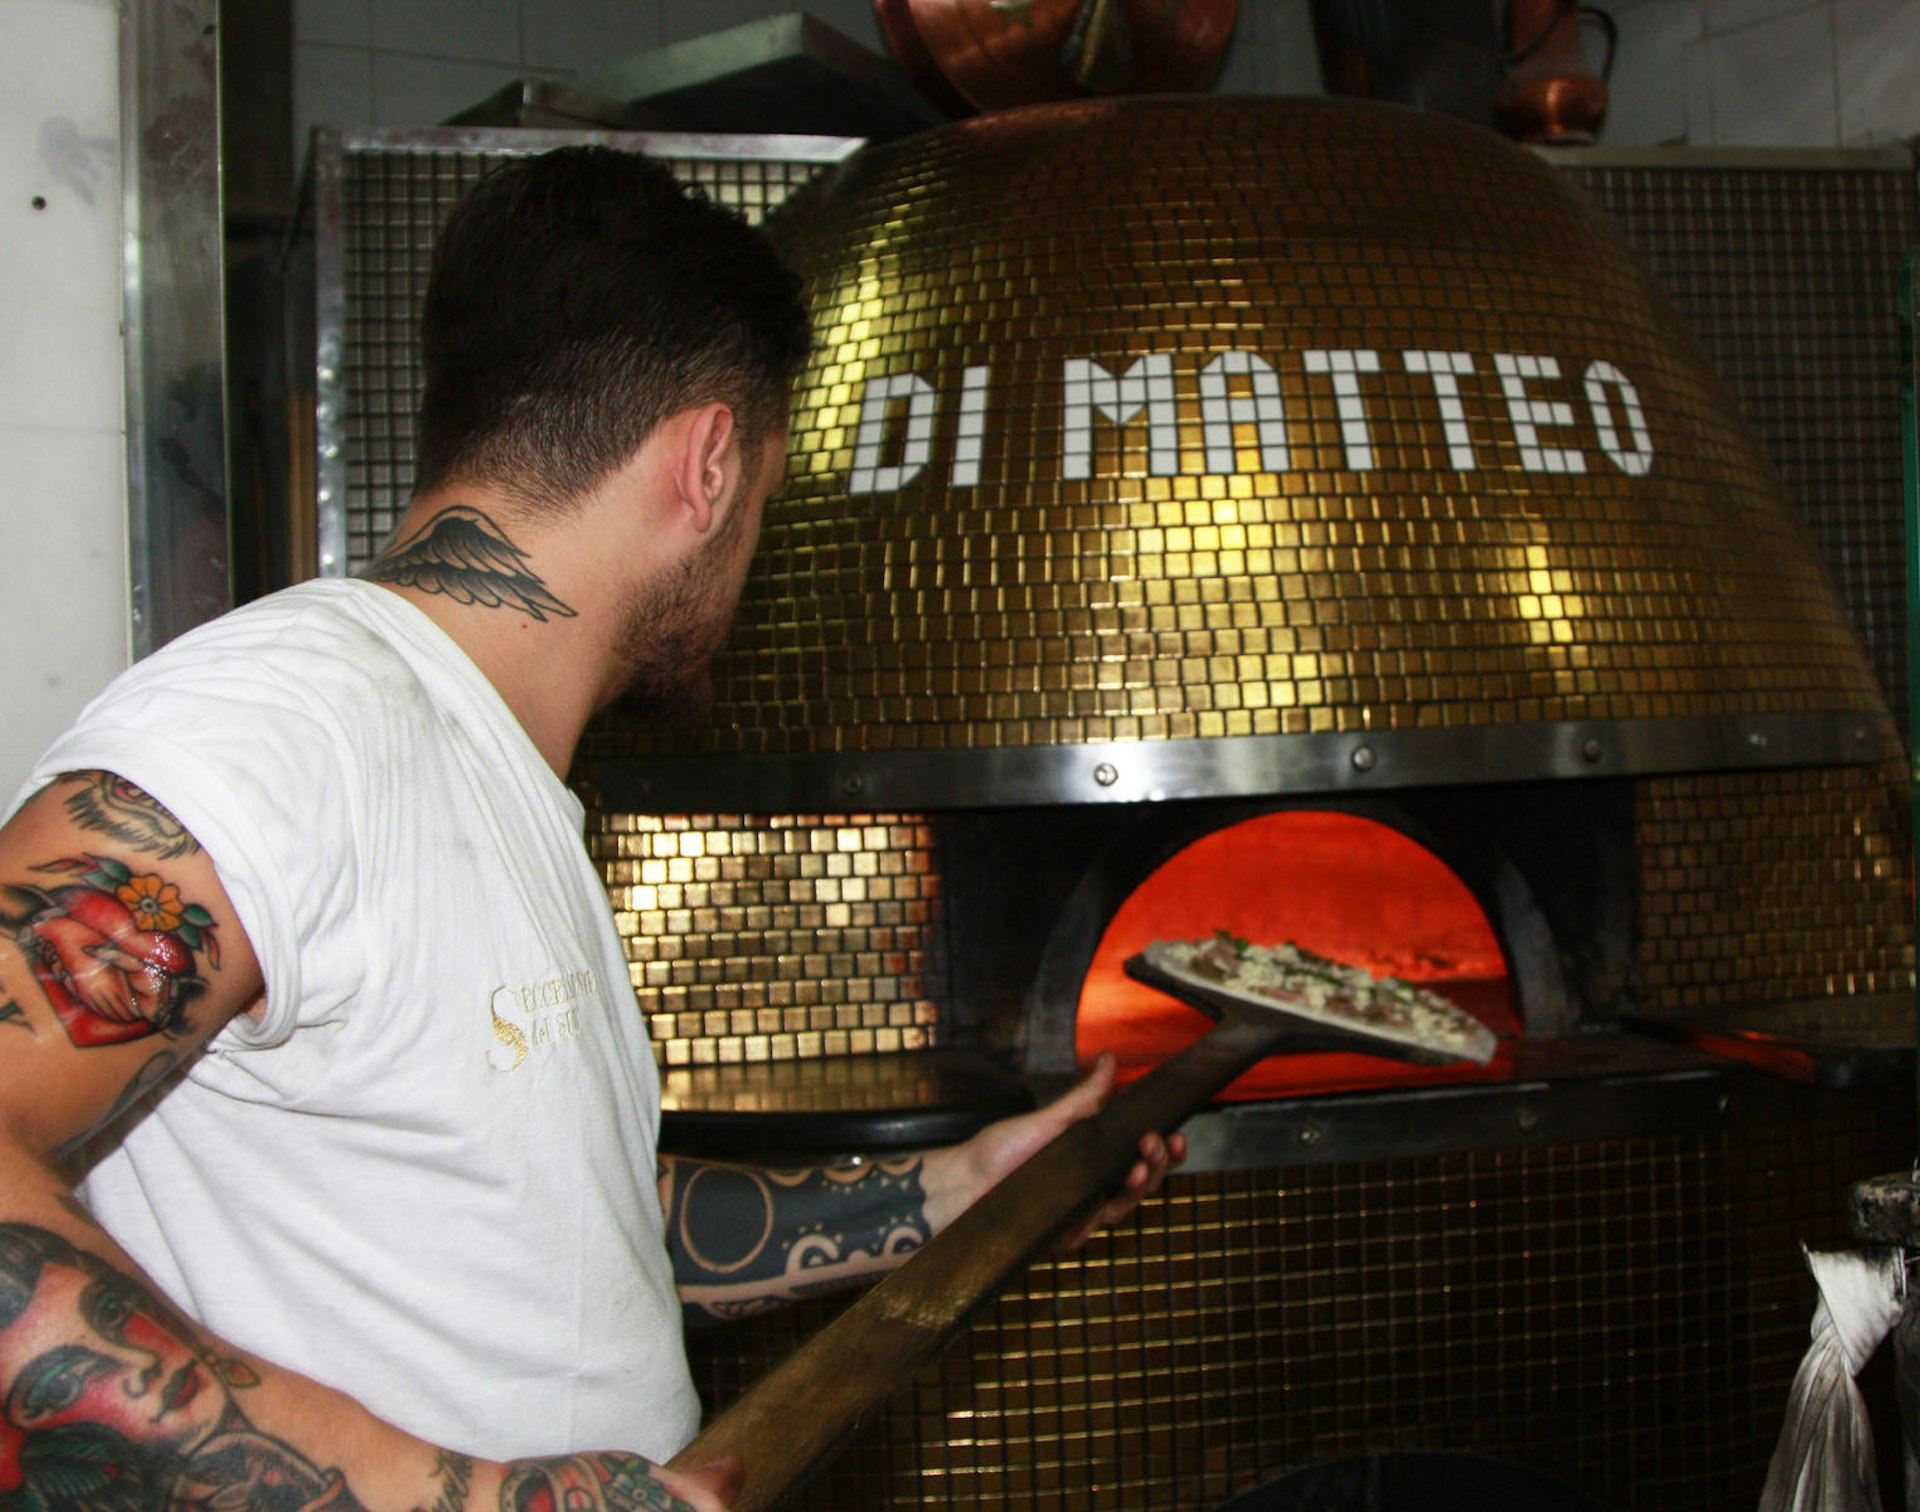 Putting the pizza in the wood-fired oven at Pizzeria Di Matteo © Kristin Melia / Lonely Planet